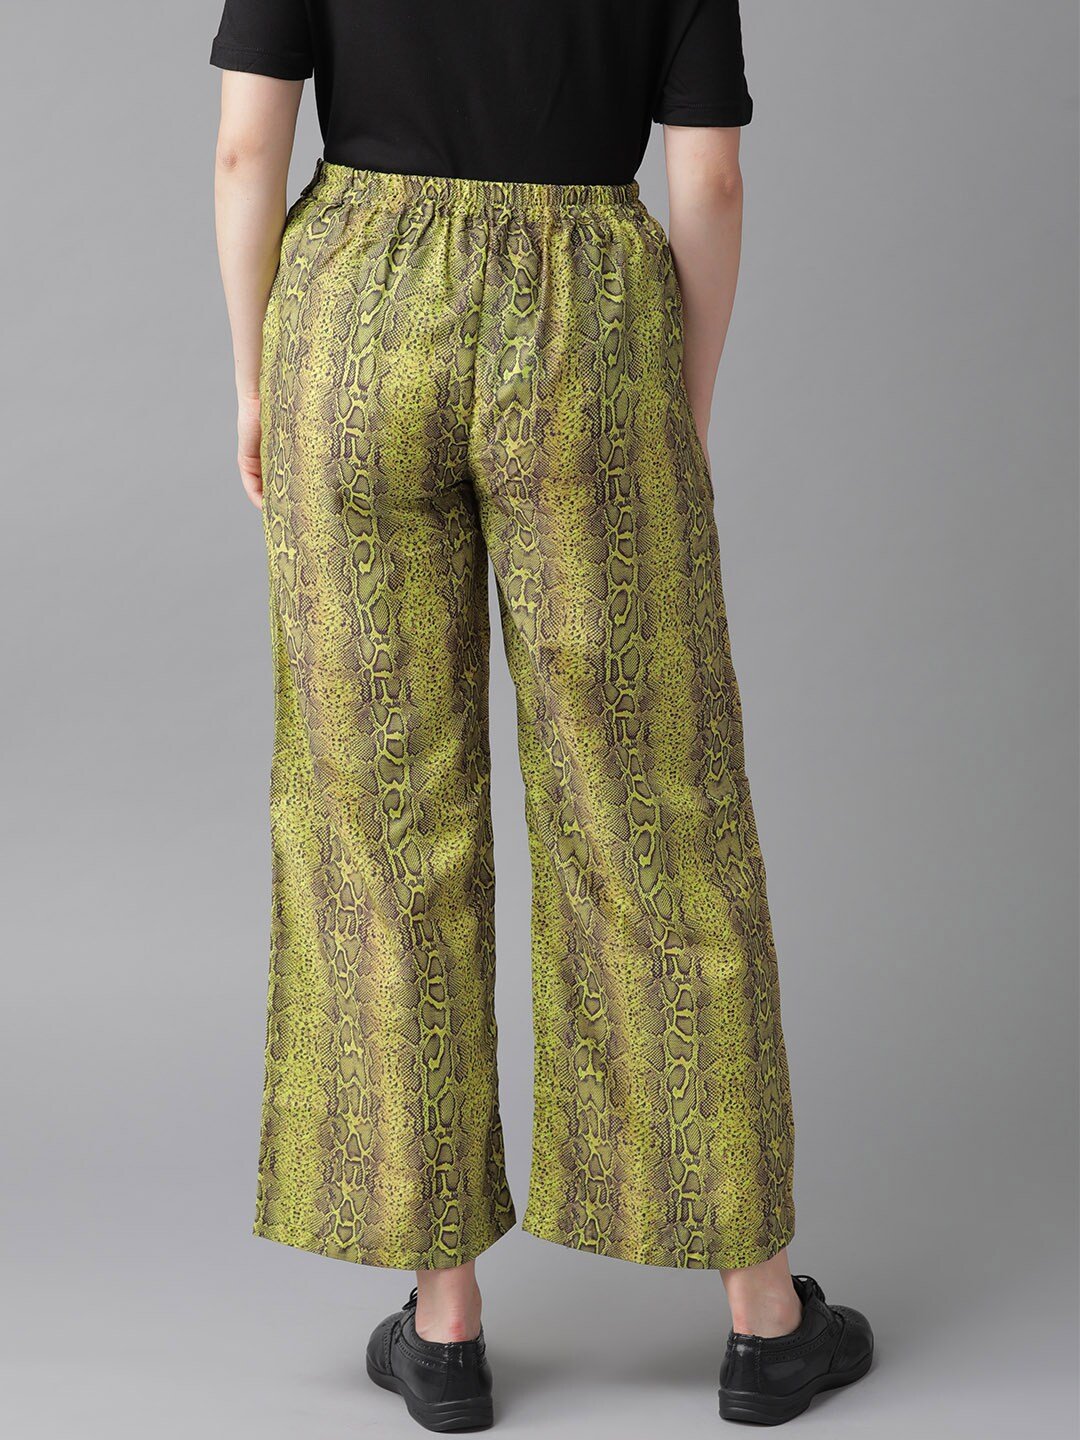 Women's  Lime Green & Coffee Brown Snakeskin Print Cropped Straight Palazzos - AKS